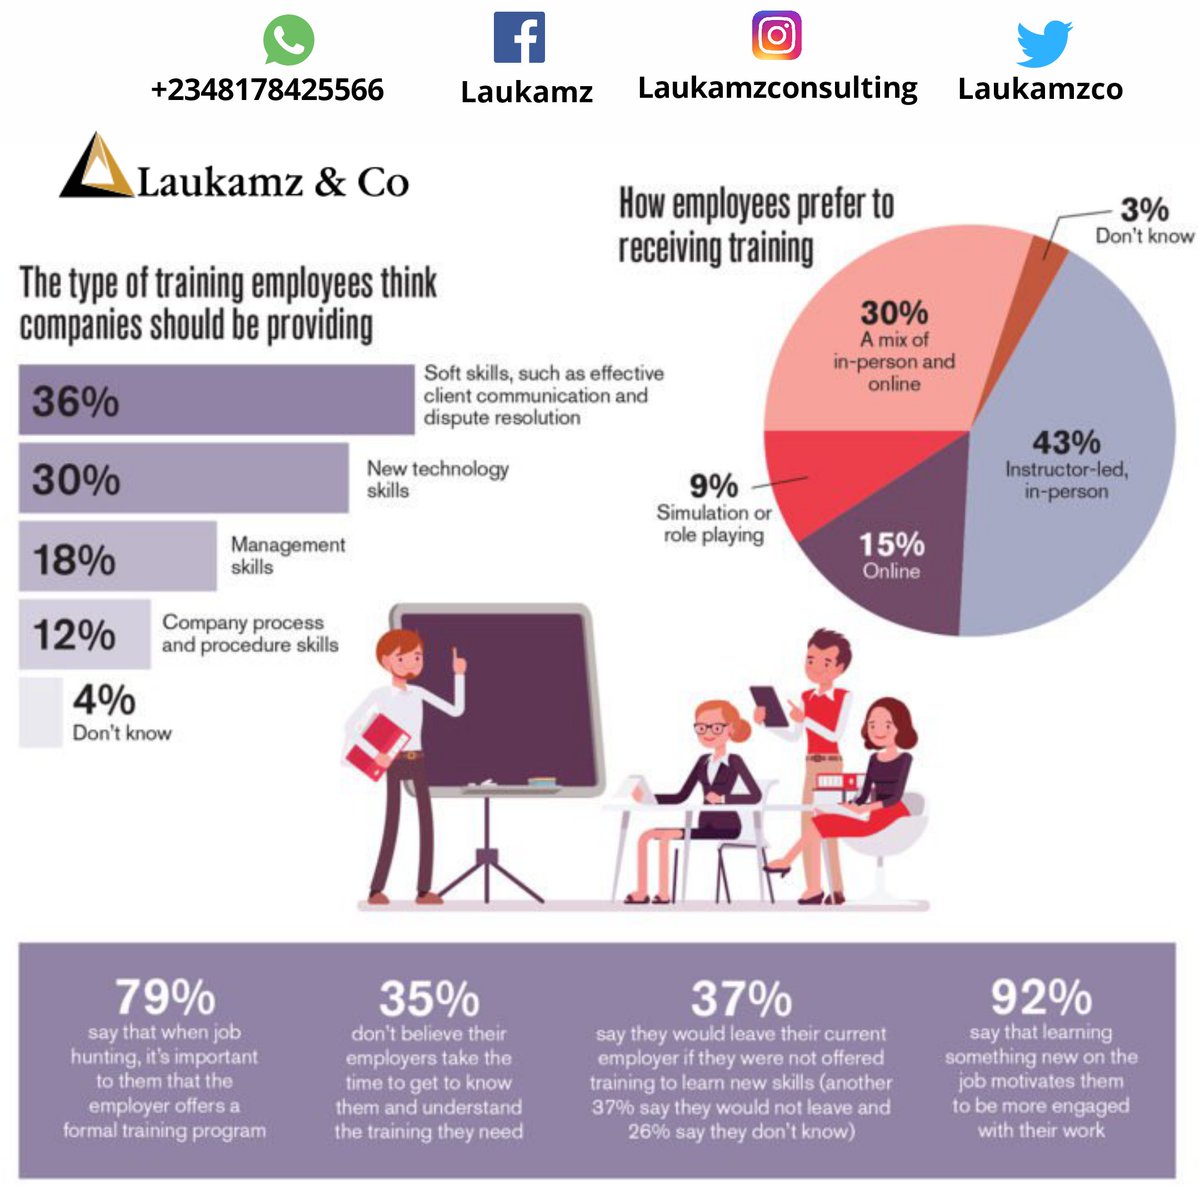 Survey Data by Google 
What kind of training do your employees believe you should be providing? #infographic #infographic #learning #training #employeetraining #employeelearning #talentdevelopment #learninganddevelopment #careerdevelopment #defstar5